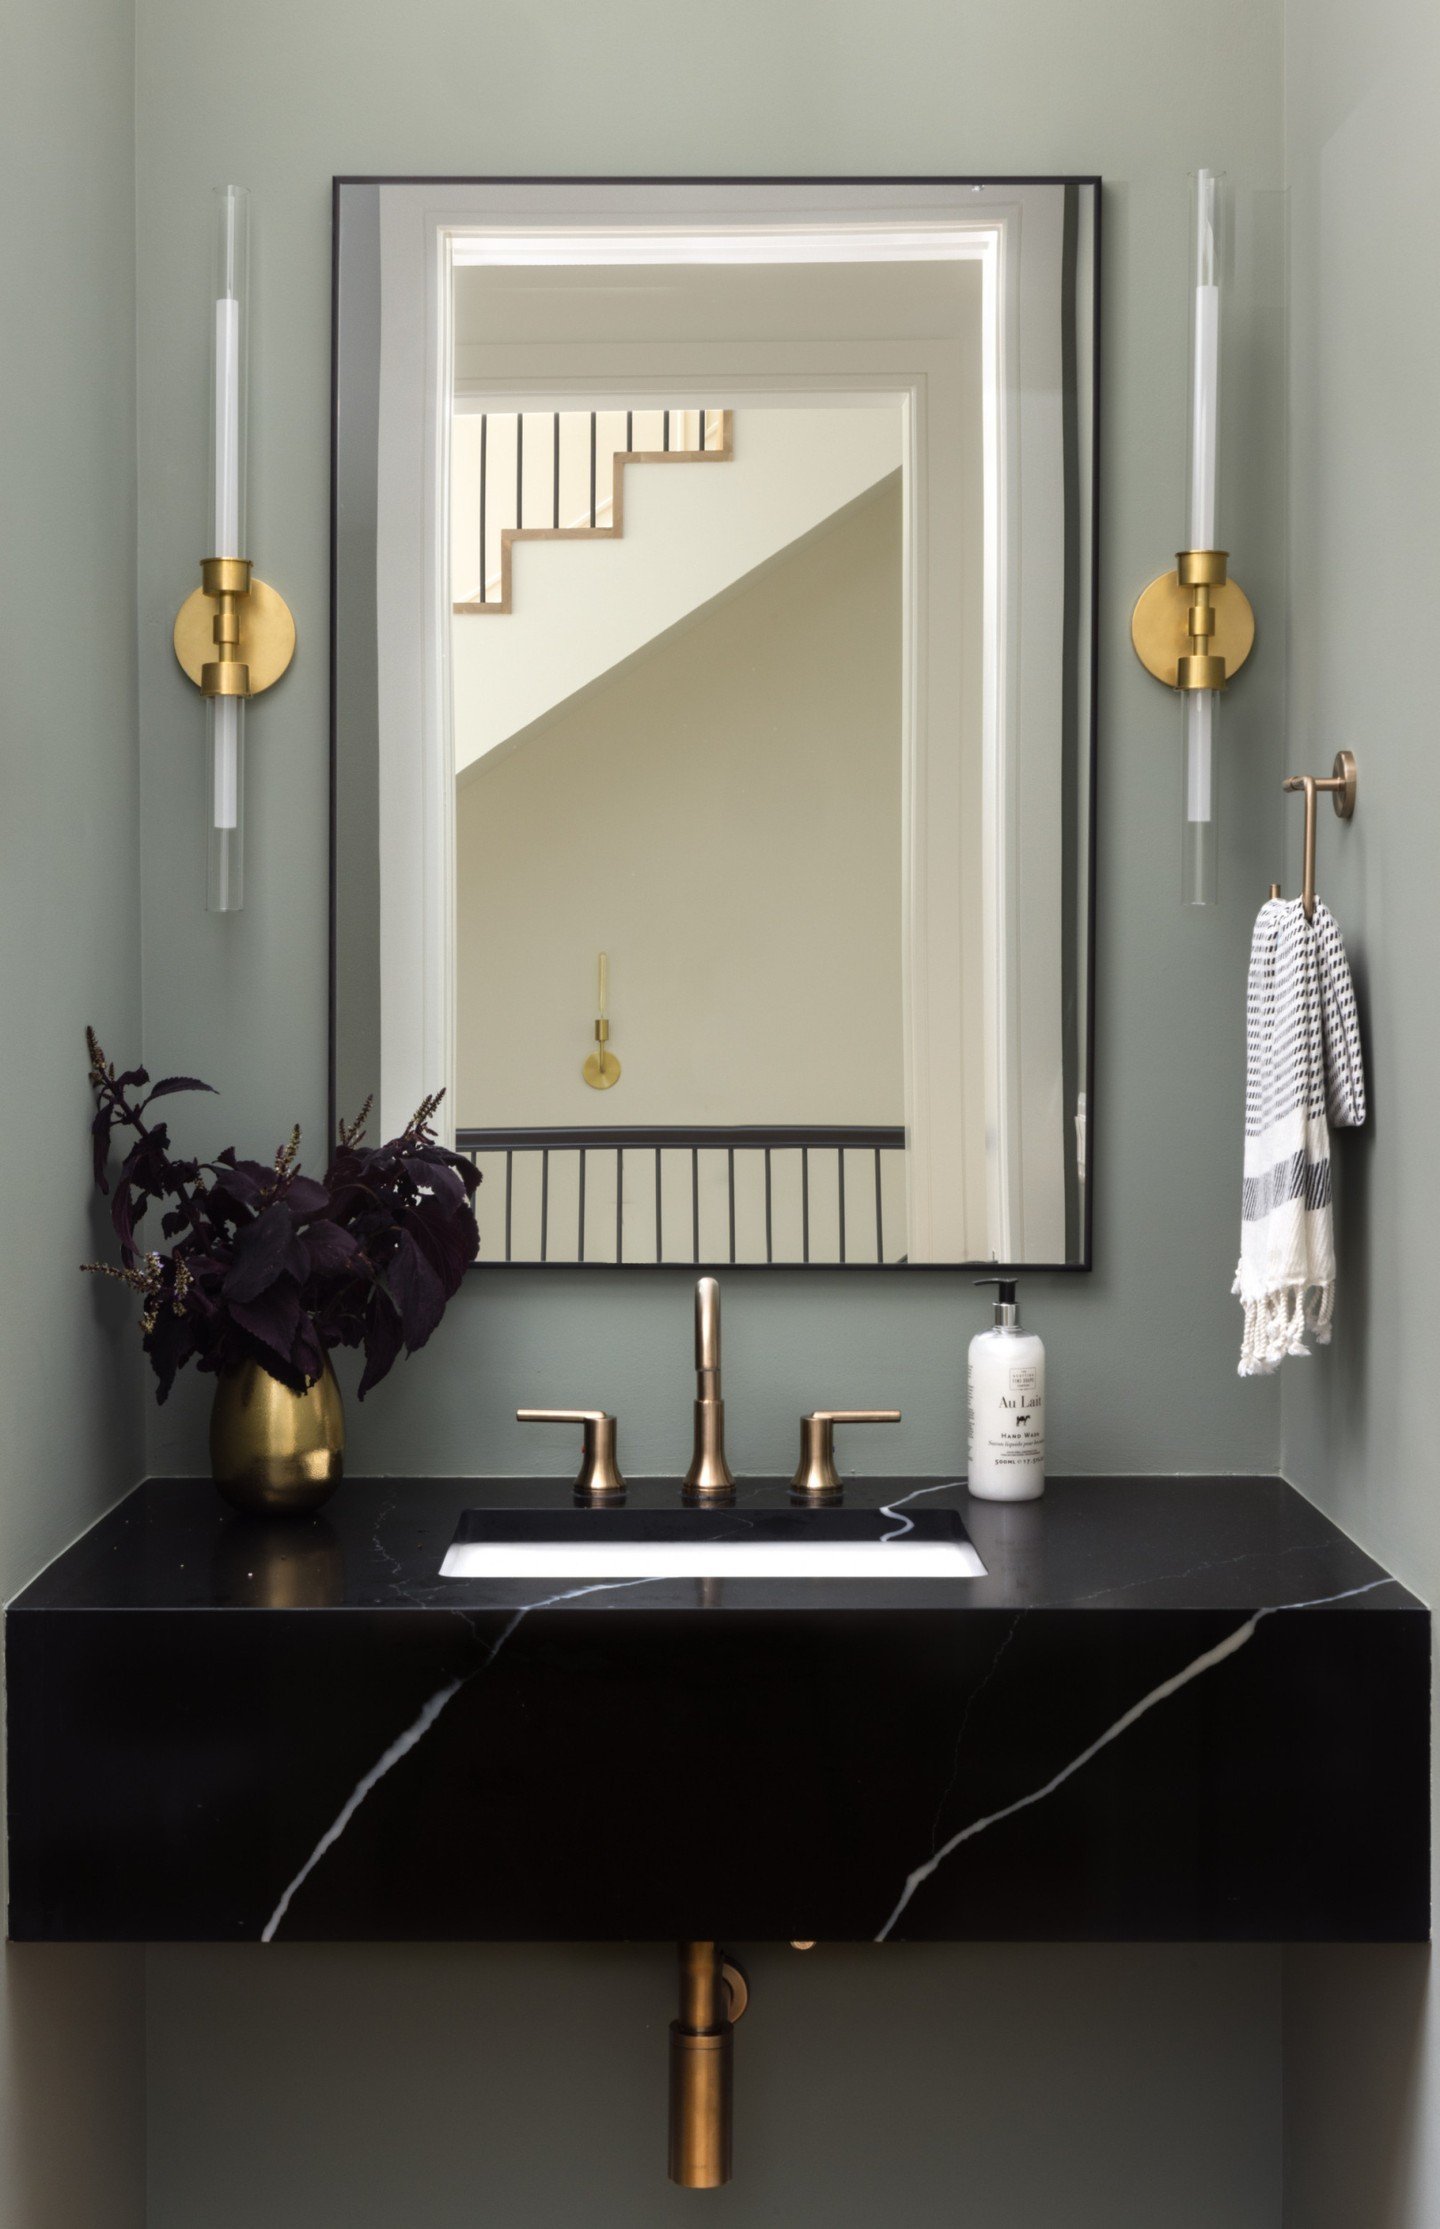 We love a good powder room round up!  Its such a small but fun space to take a design risk, since many people who visit your home will pass through it.  Maybe we will inspire you to be bold!

1 -  Go green (and black marble)! @brusharborhomes
2 - Mod